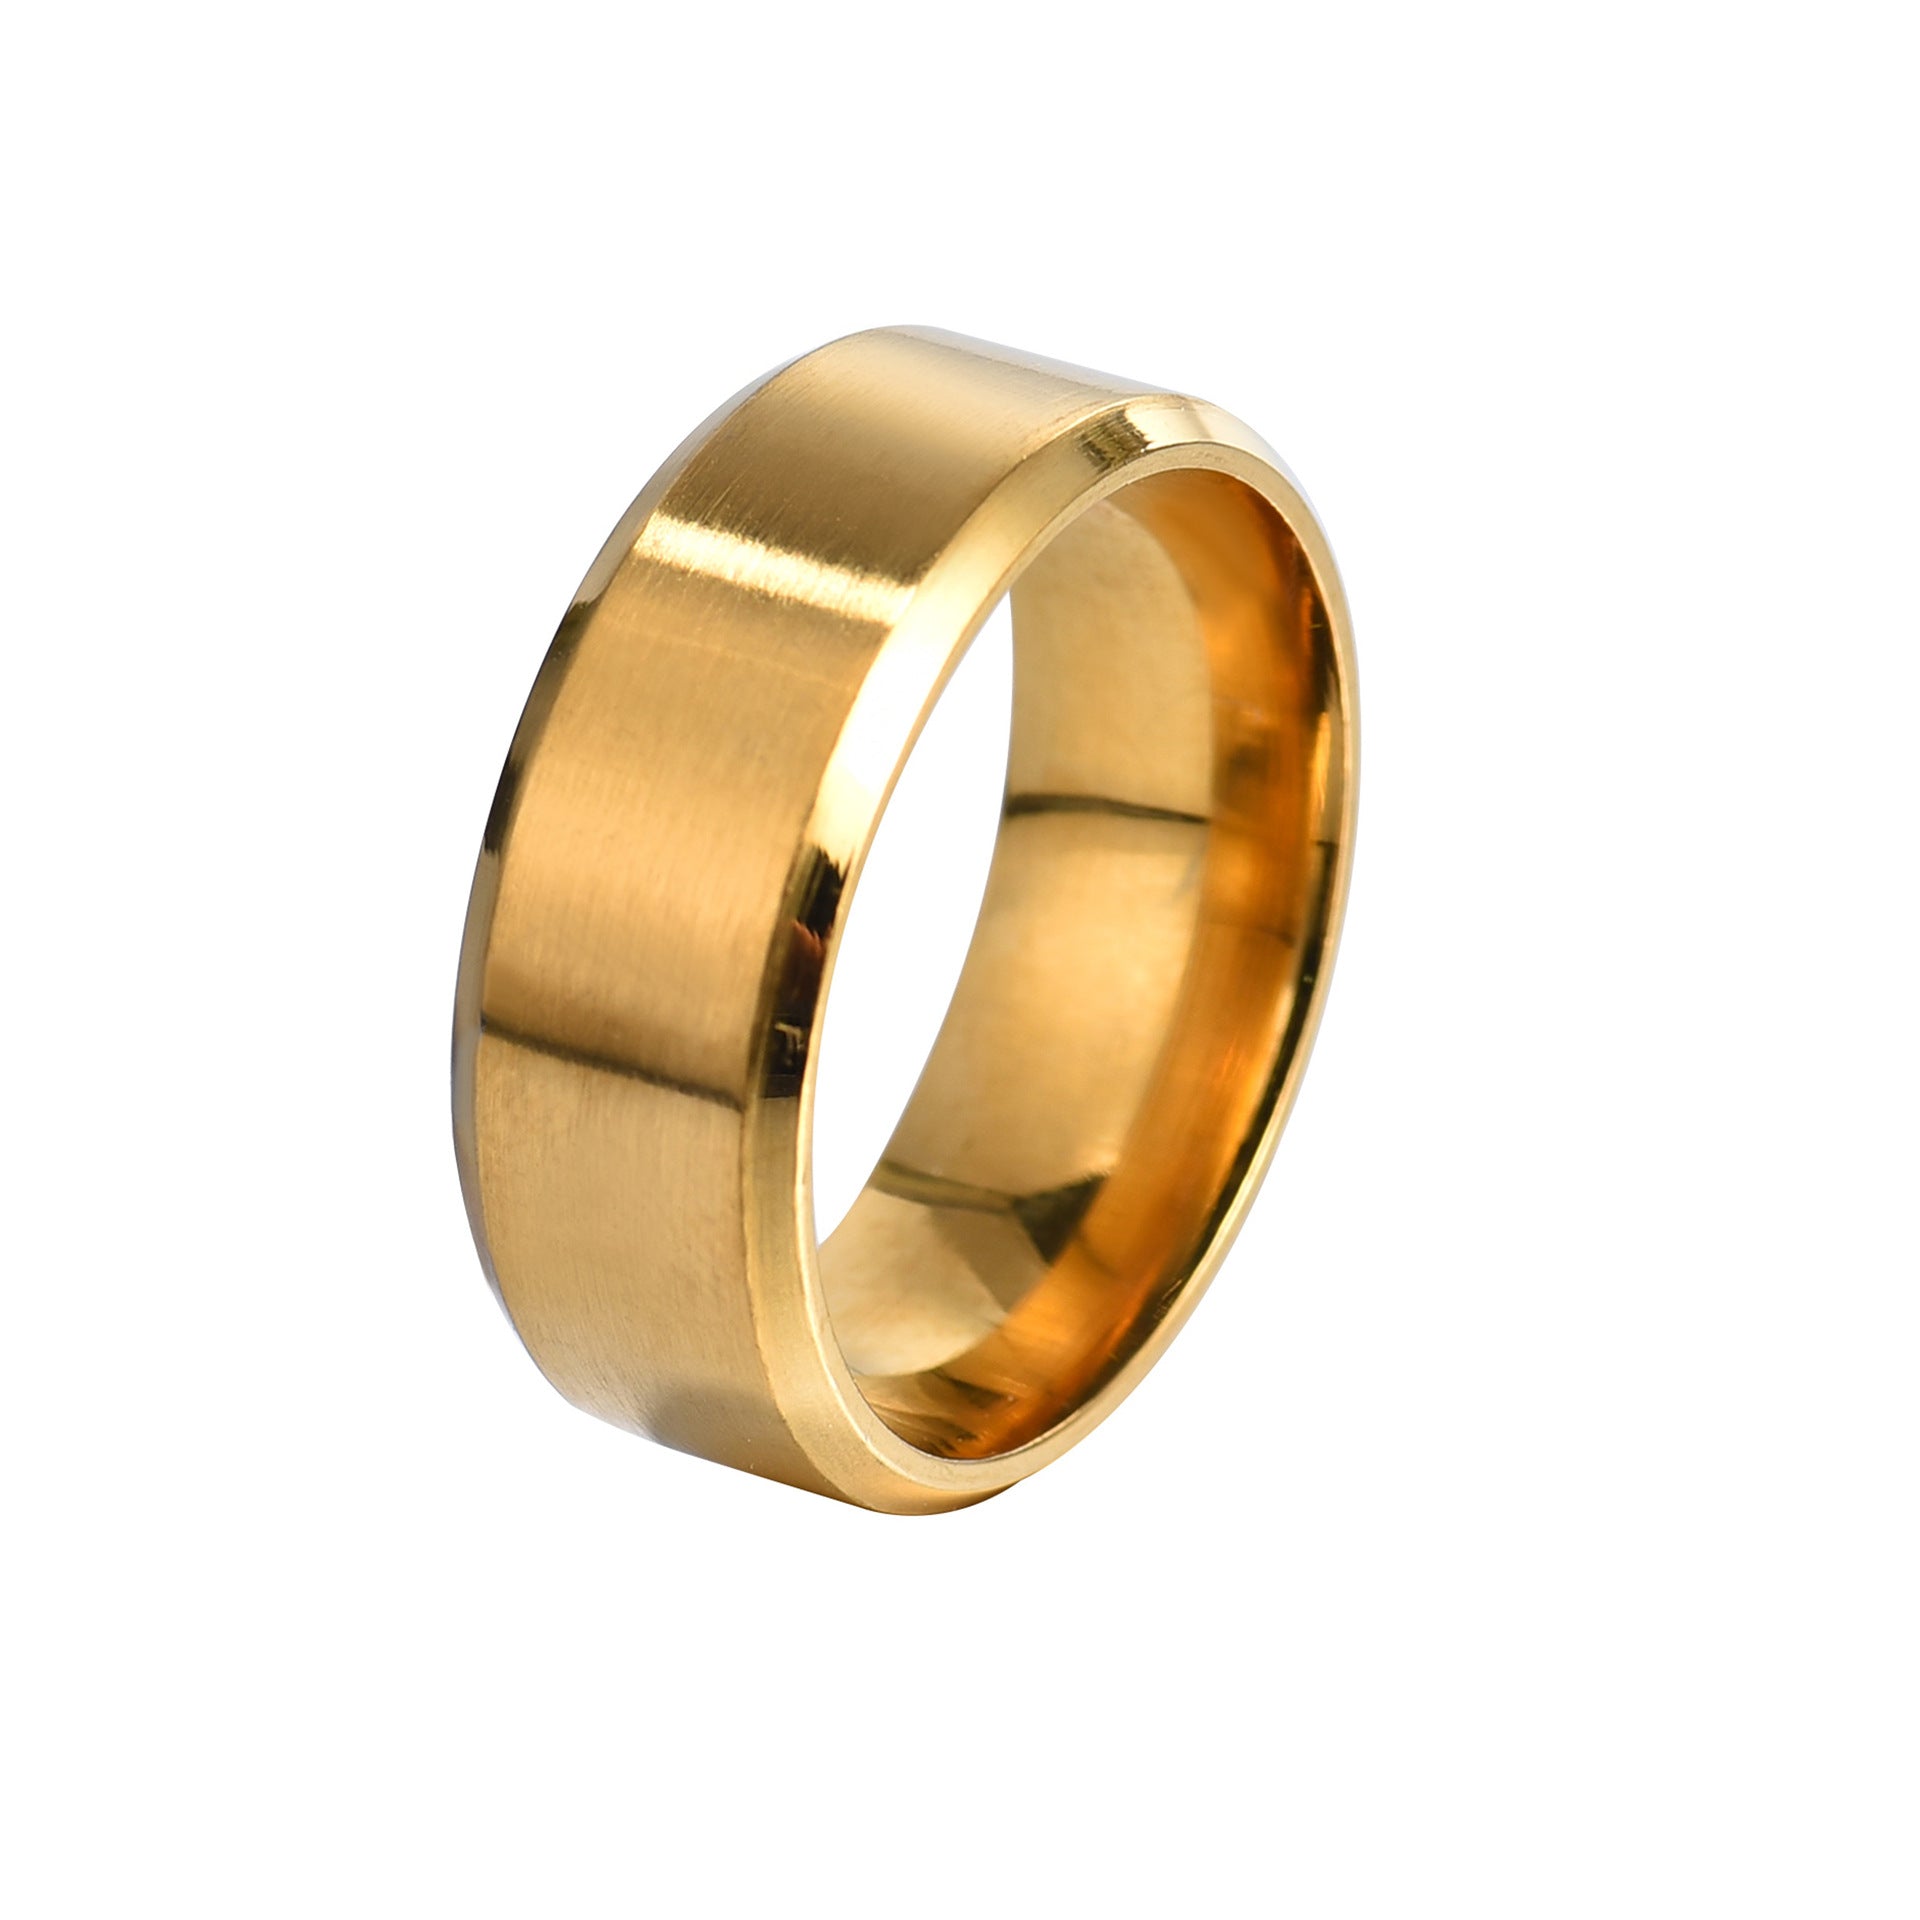 Gold Colored 316L Quality Steel Ring Wedding Ring (25 Size)